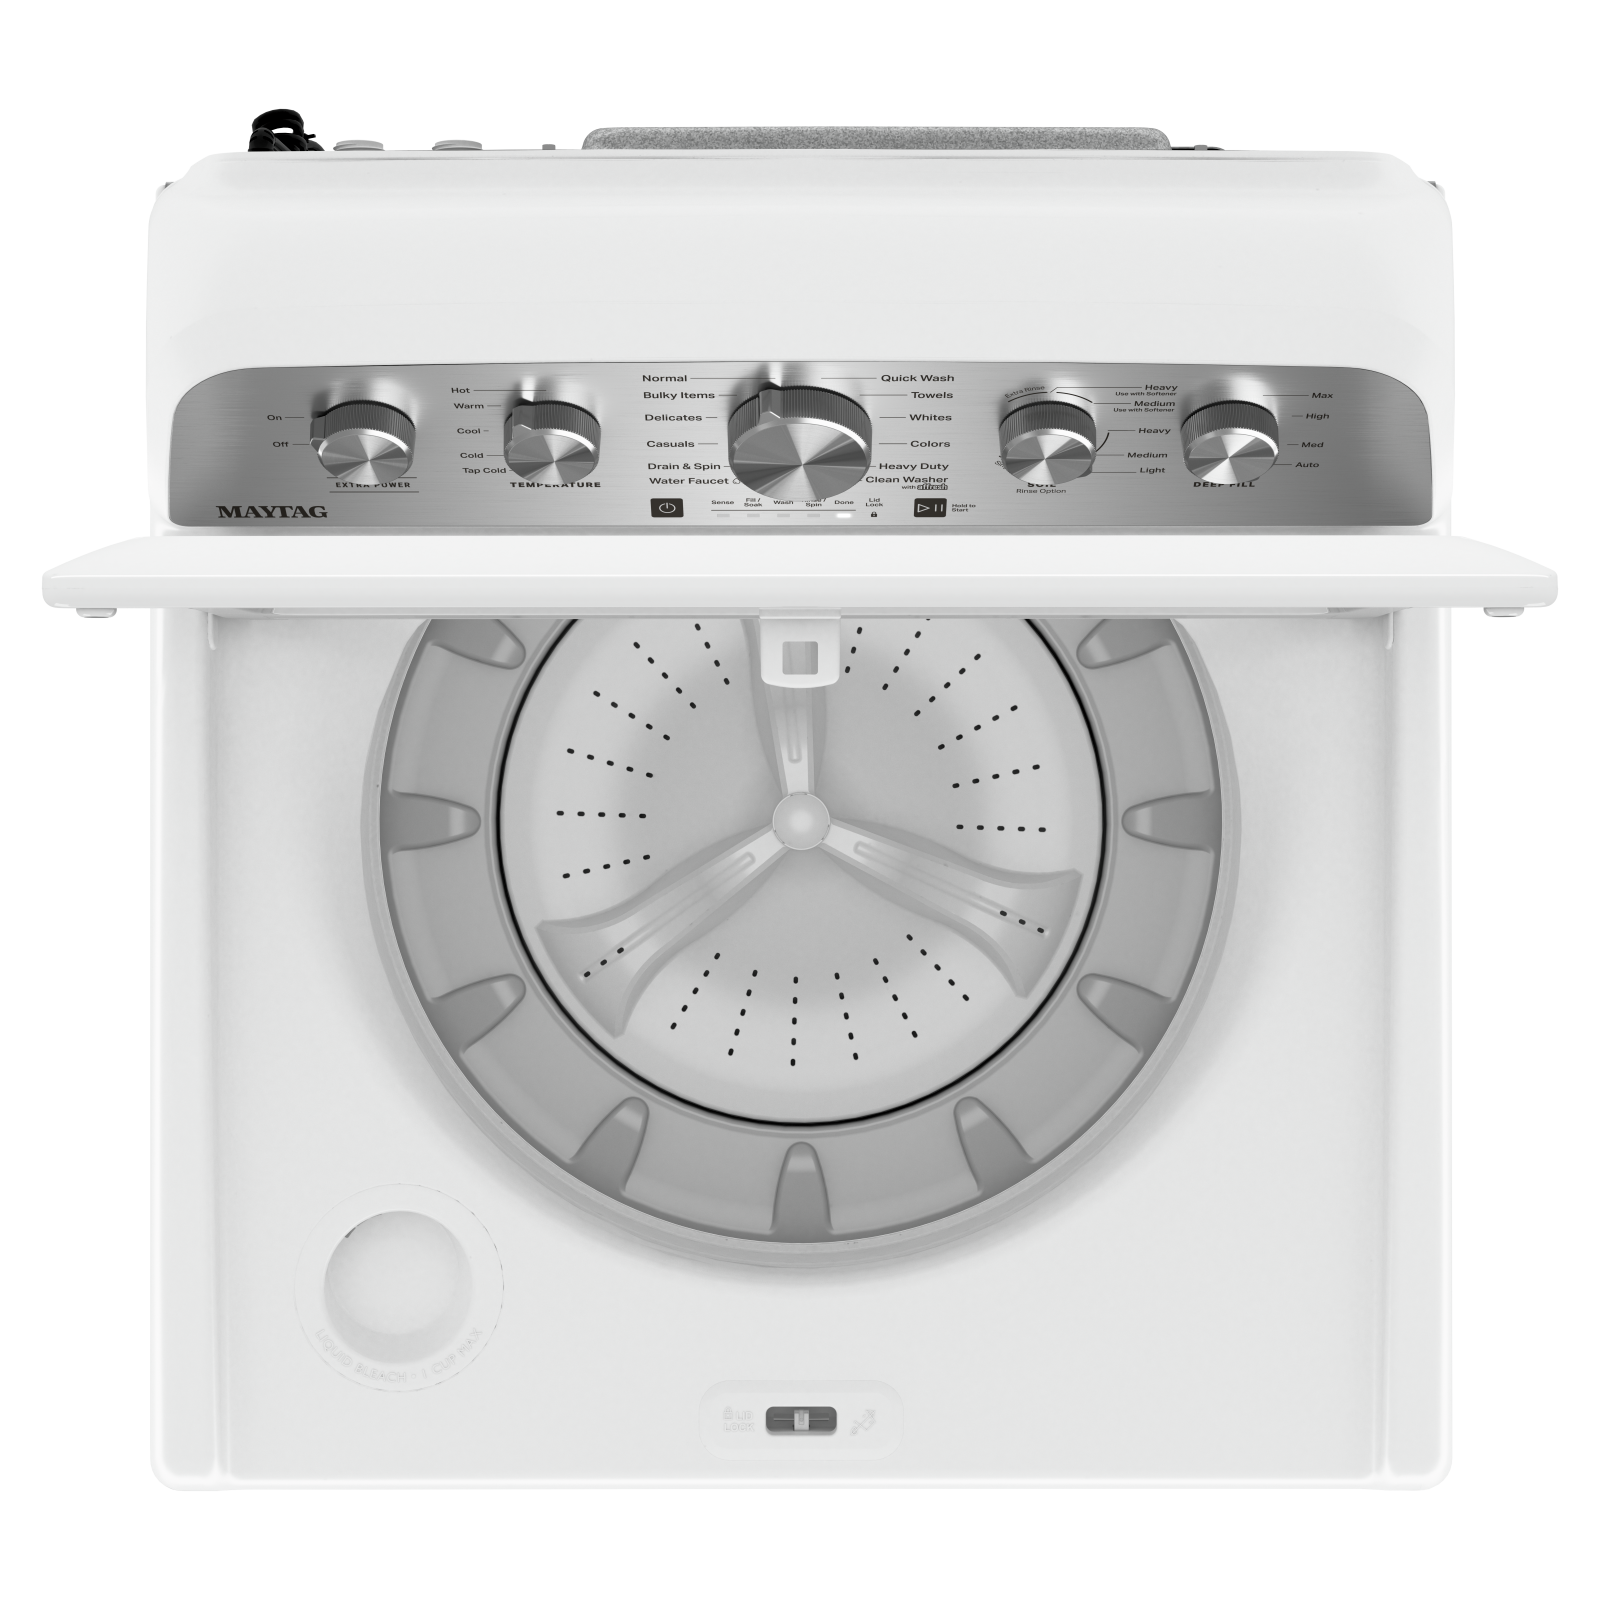 Maytag - 5.5 cu. Ft  Top Load Washer in White - MVW5430MW